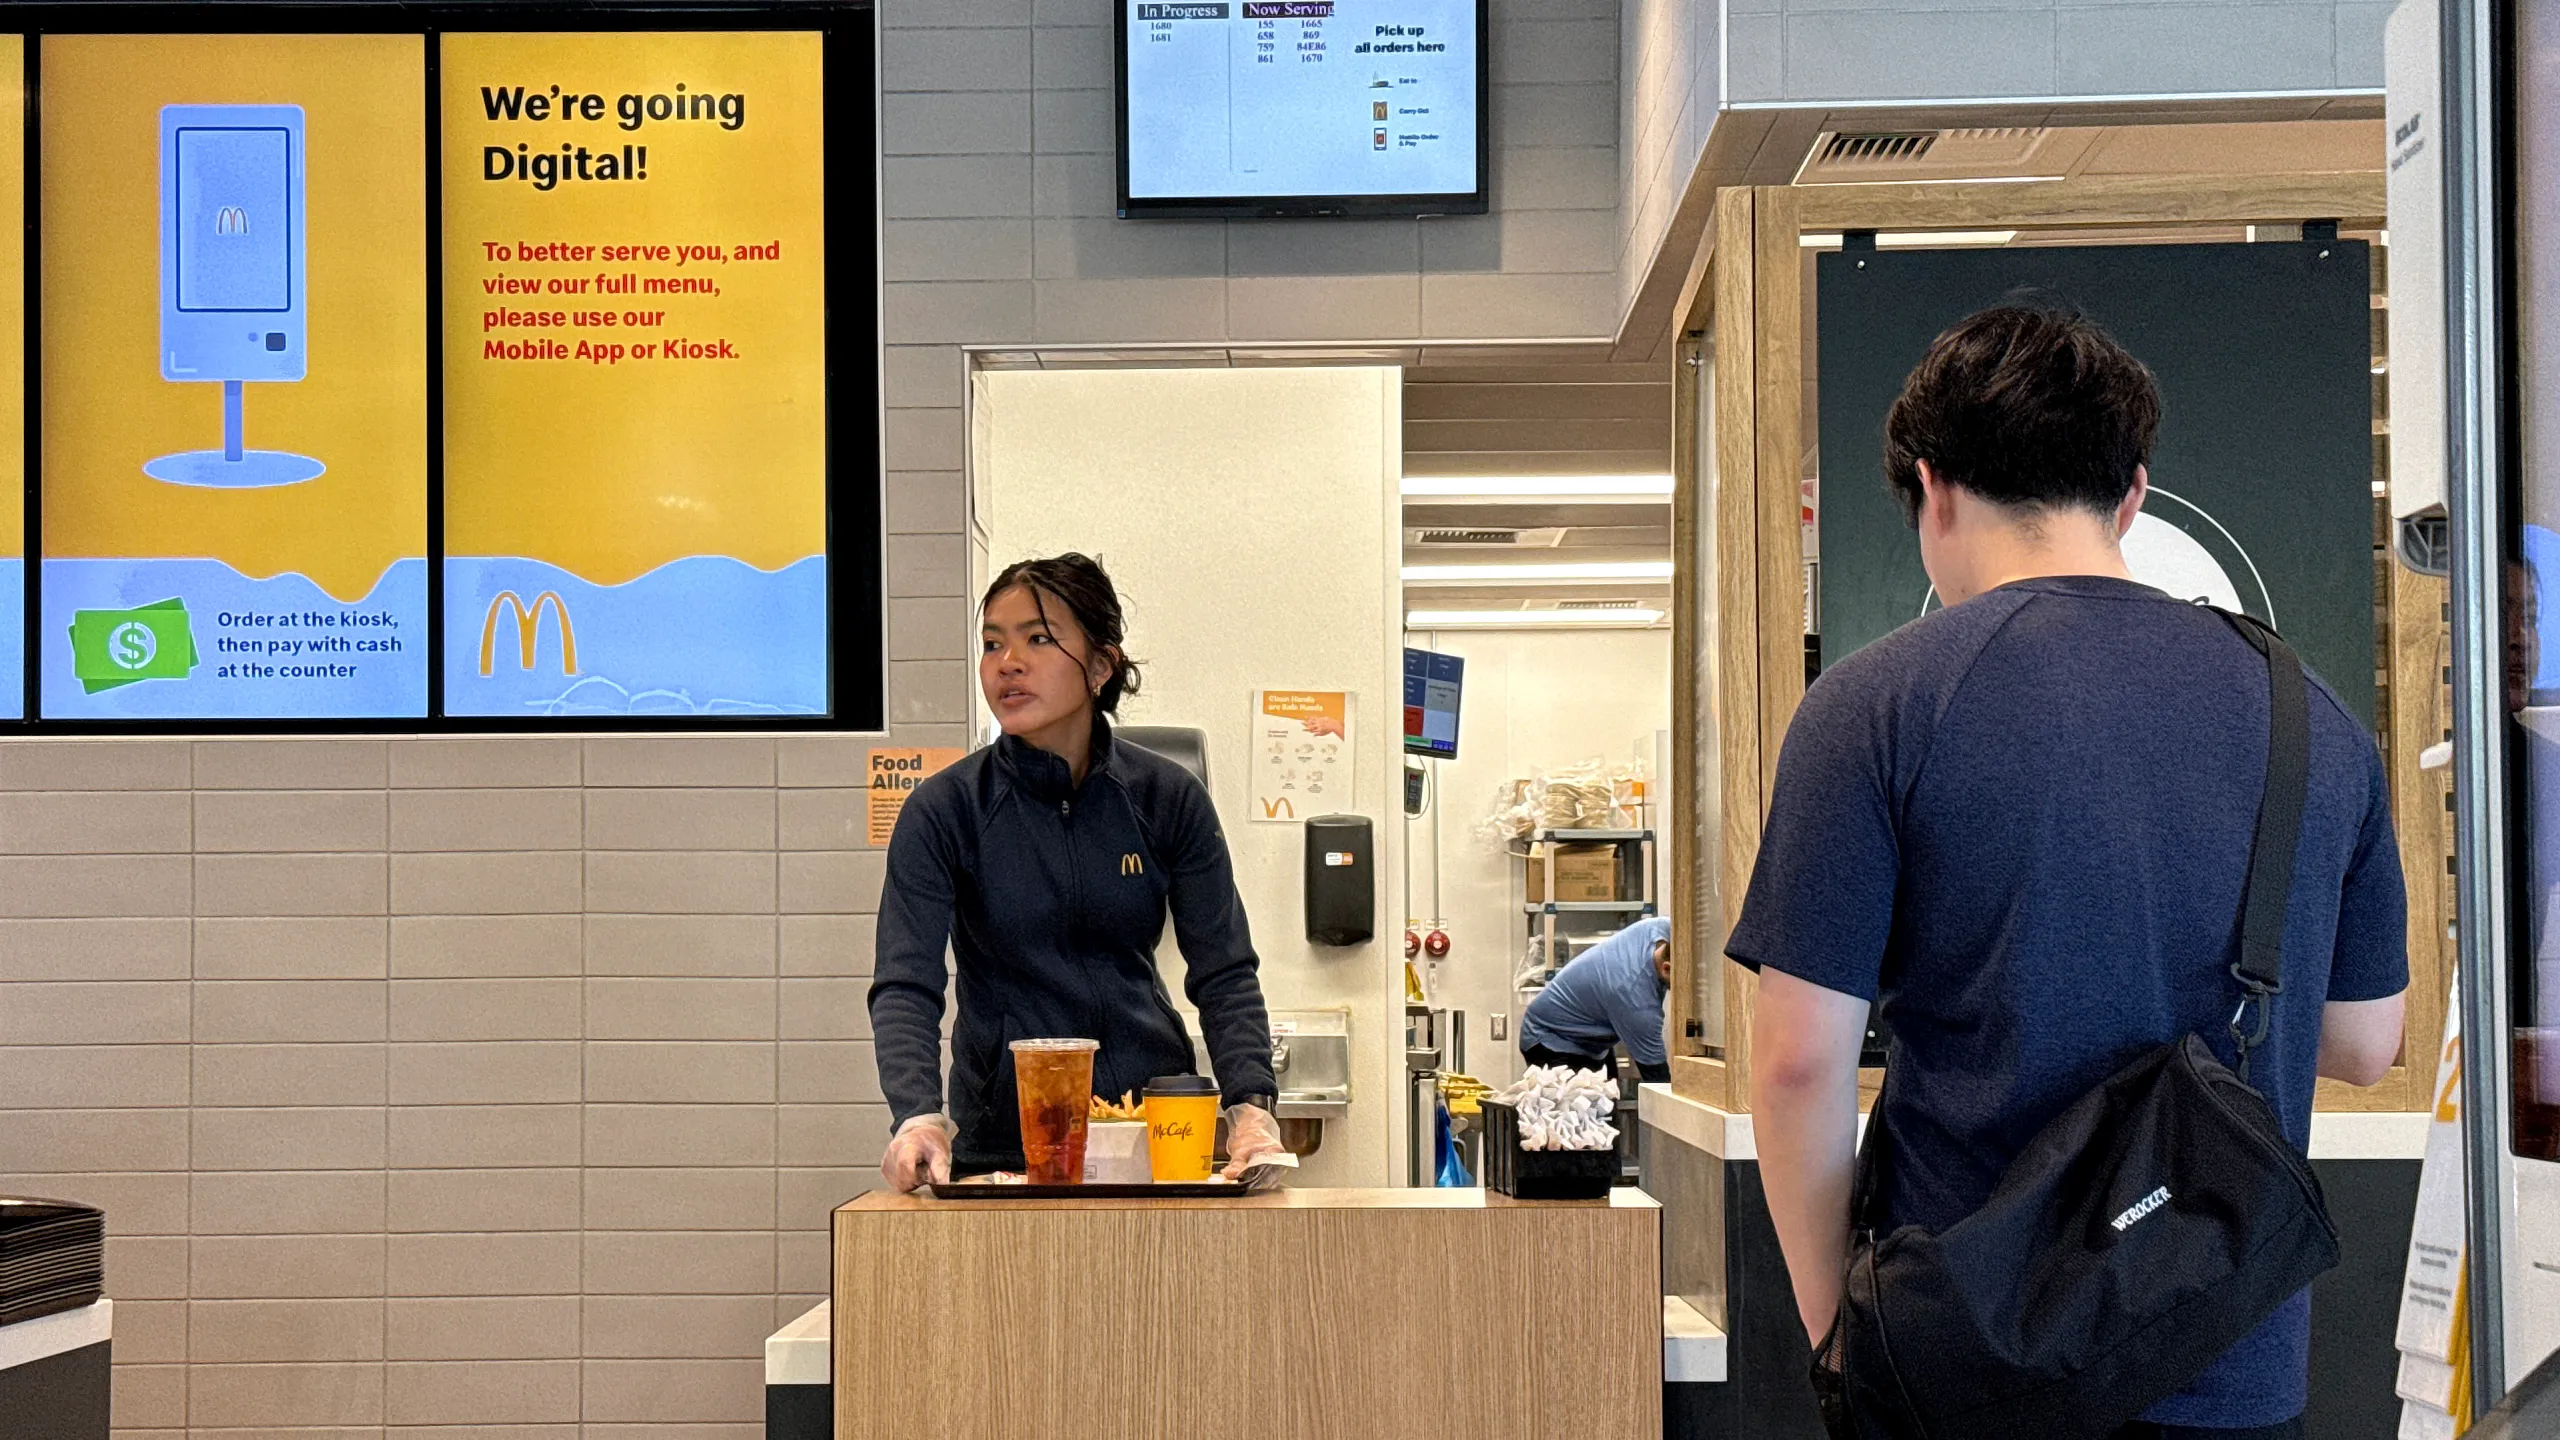 McDonald's Revamps Dining Experience: Goodbye Self-Serve Drinks, Hello $5 Bargain Meals Amid Price Hikes